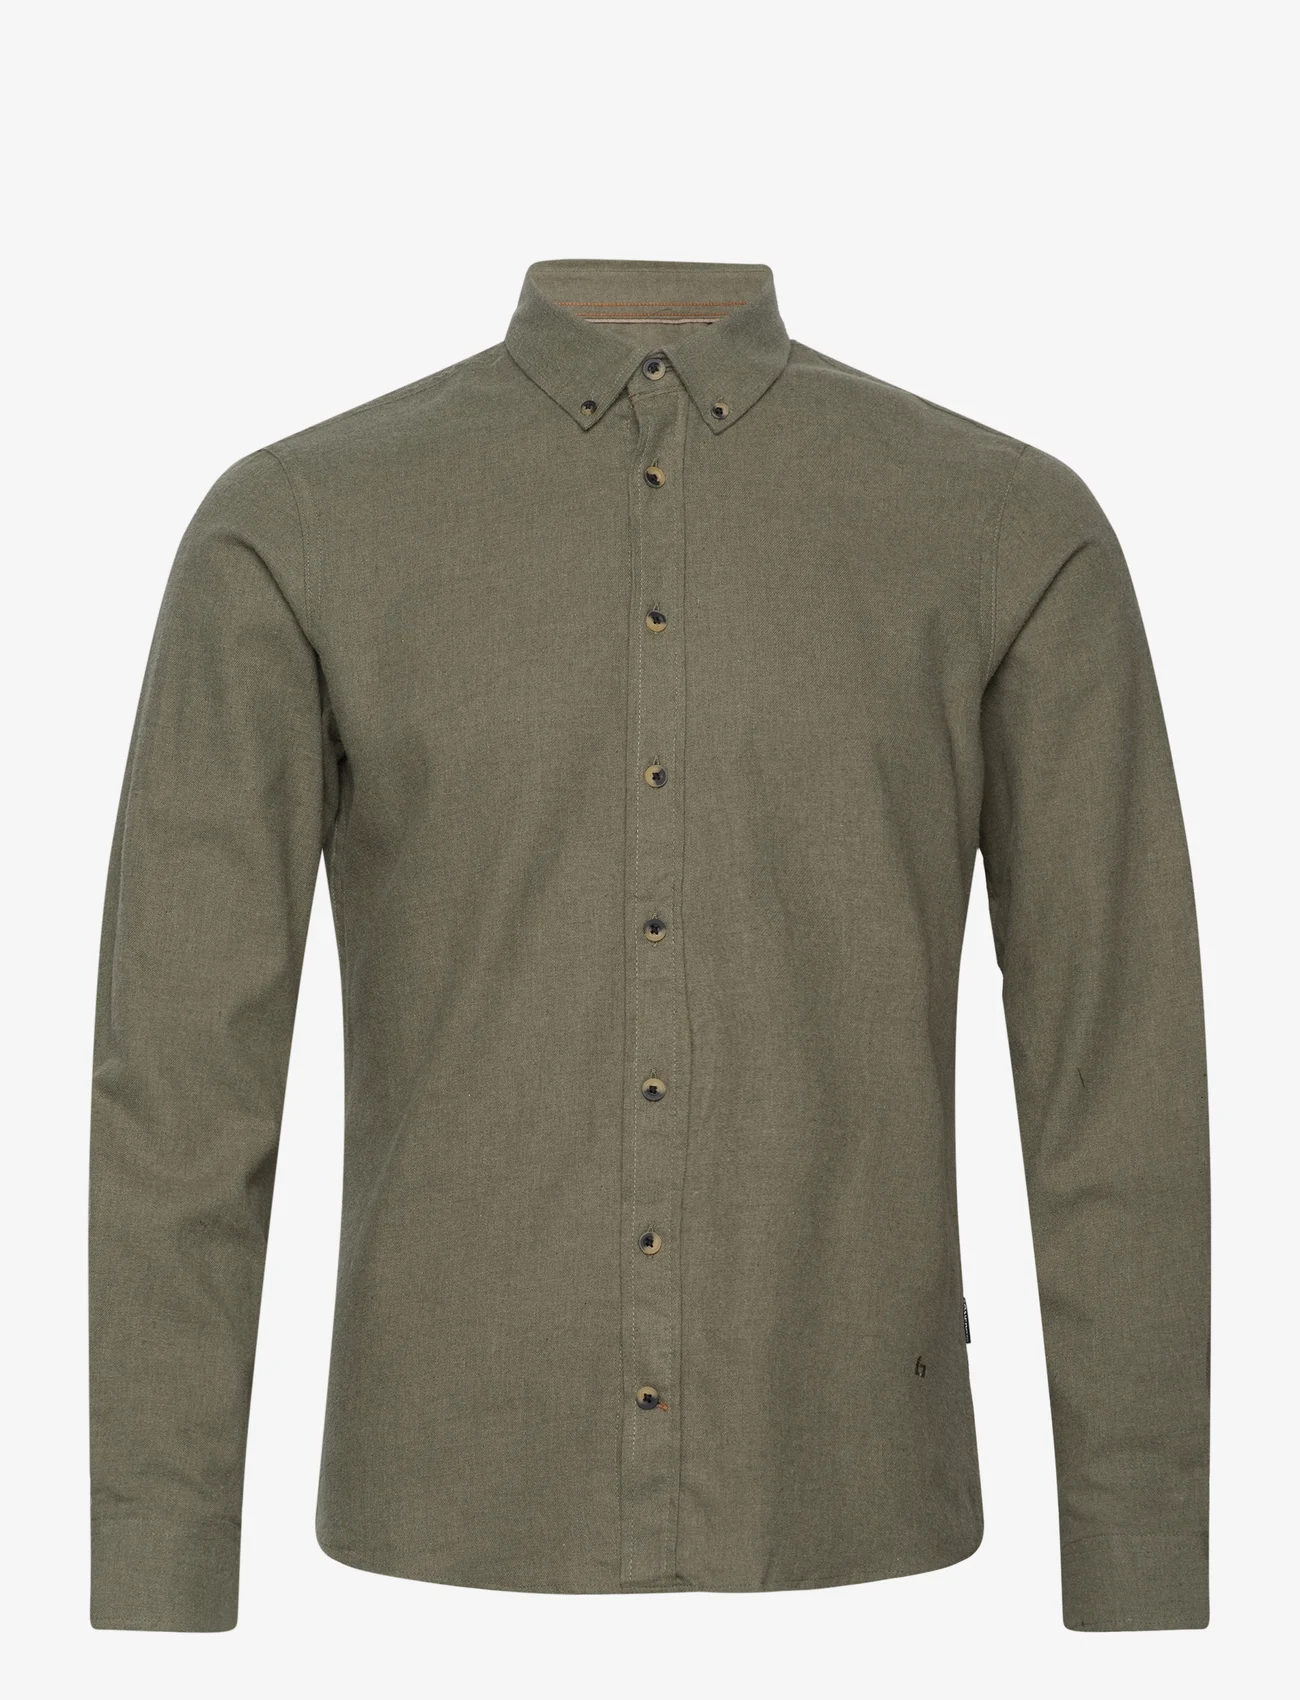 Blend - BHBURLEY shirt - lowest prices - winter moss - 0